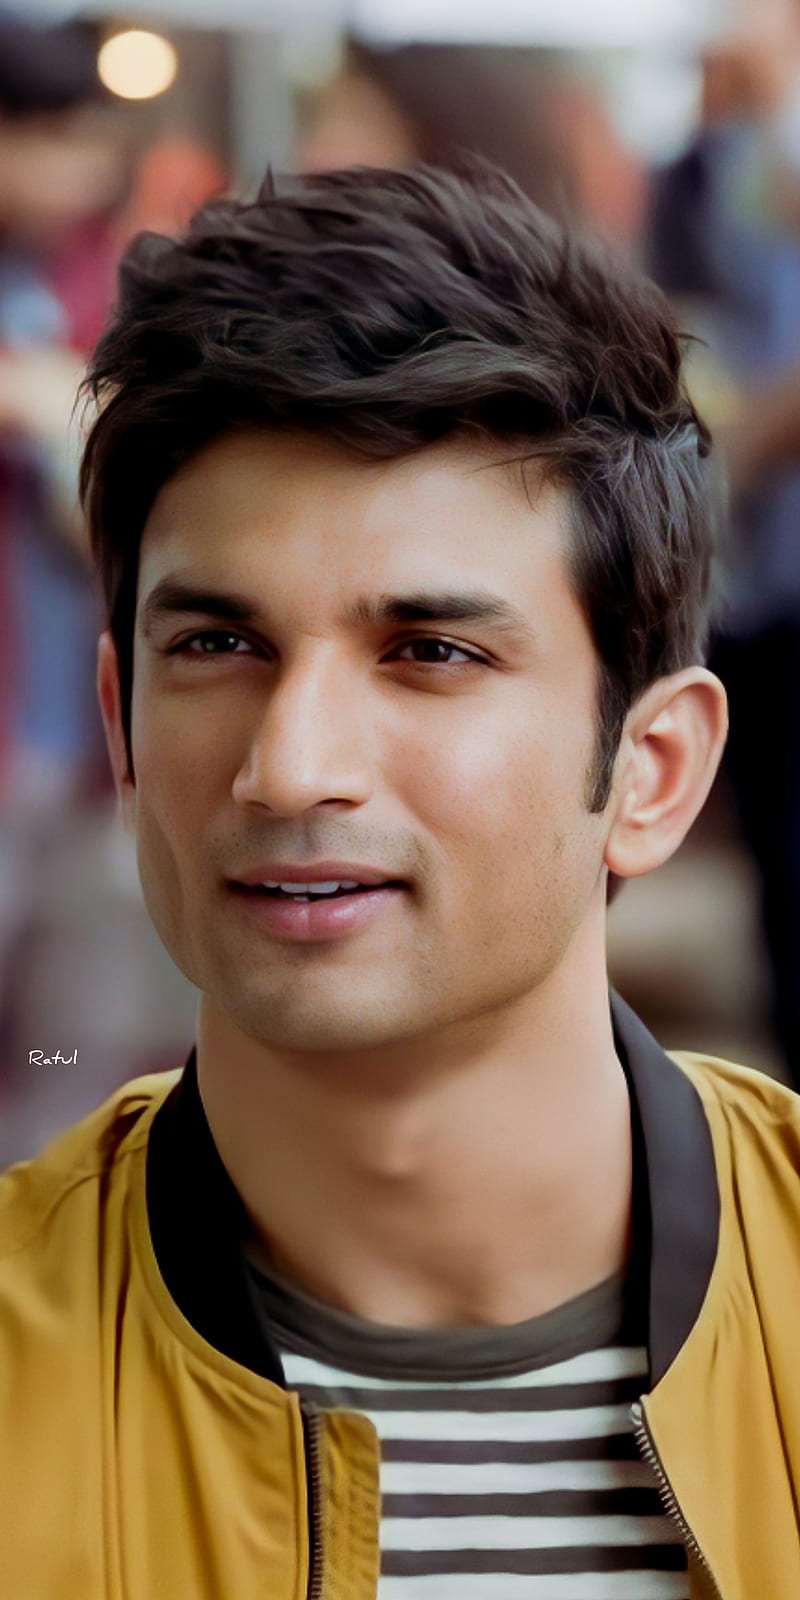 Incredible Compilation: 999+ High-Resolution Sushant Singh Rajput Images in Full 4K